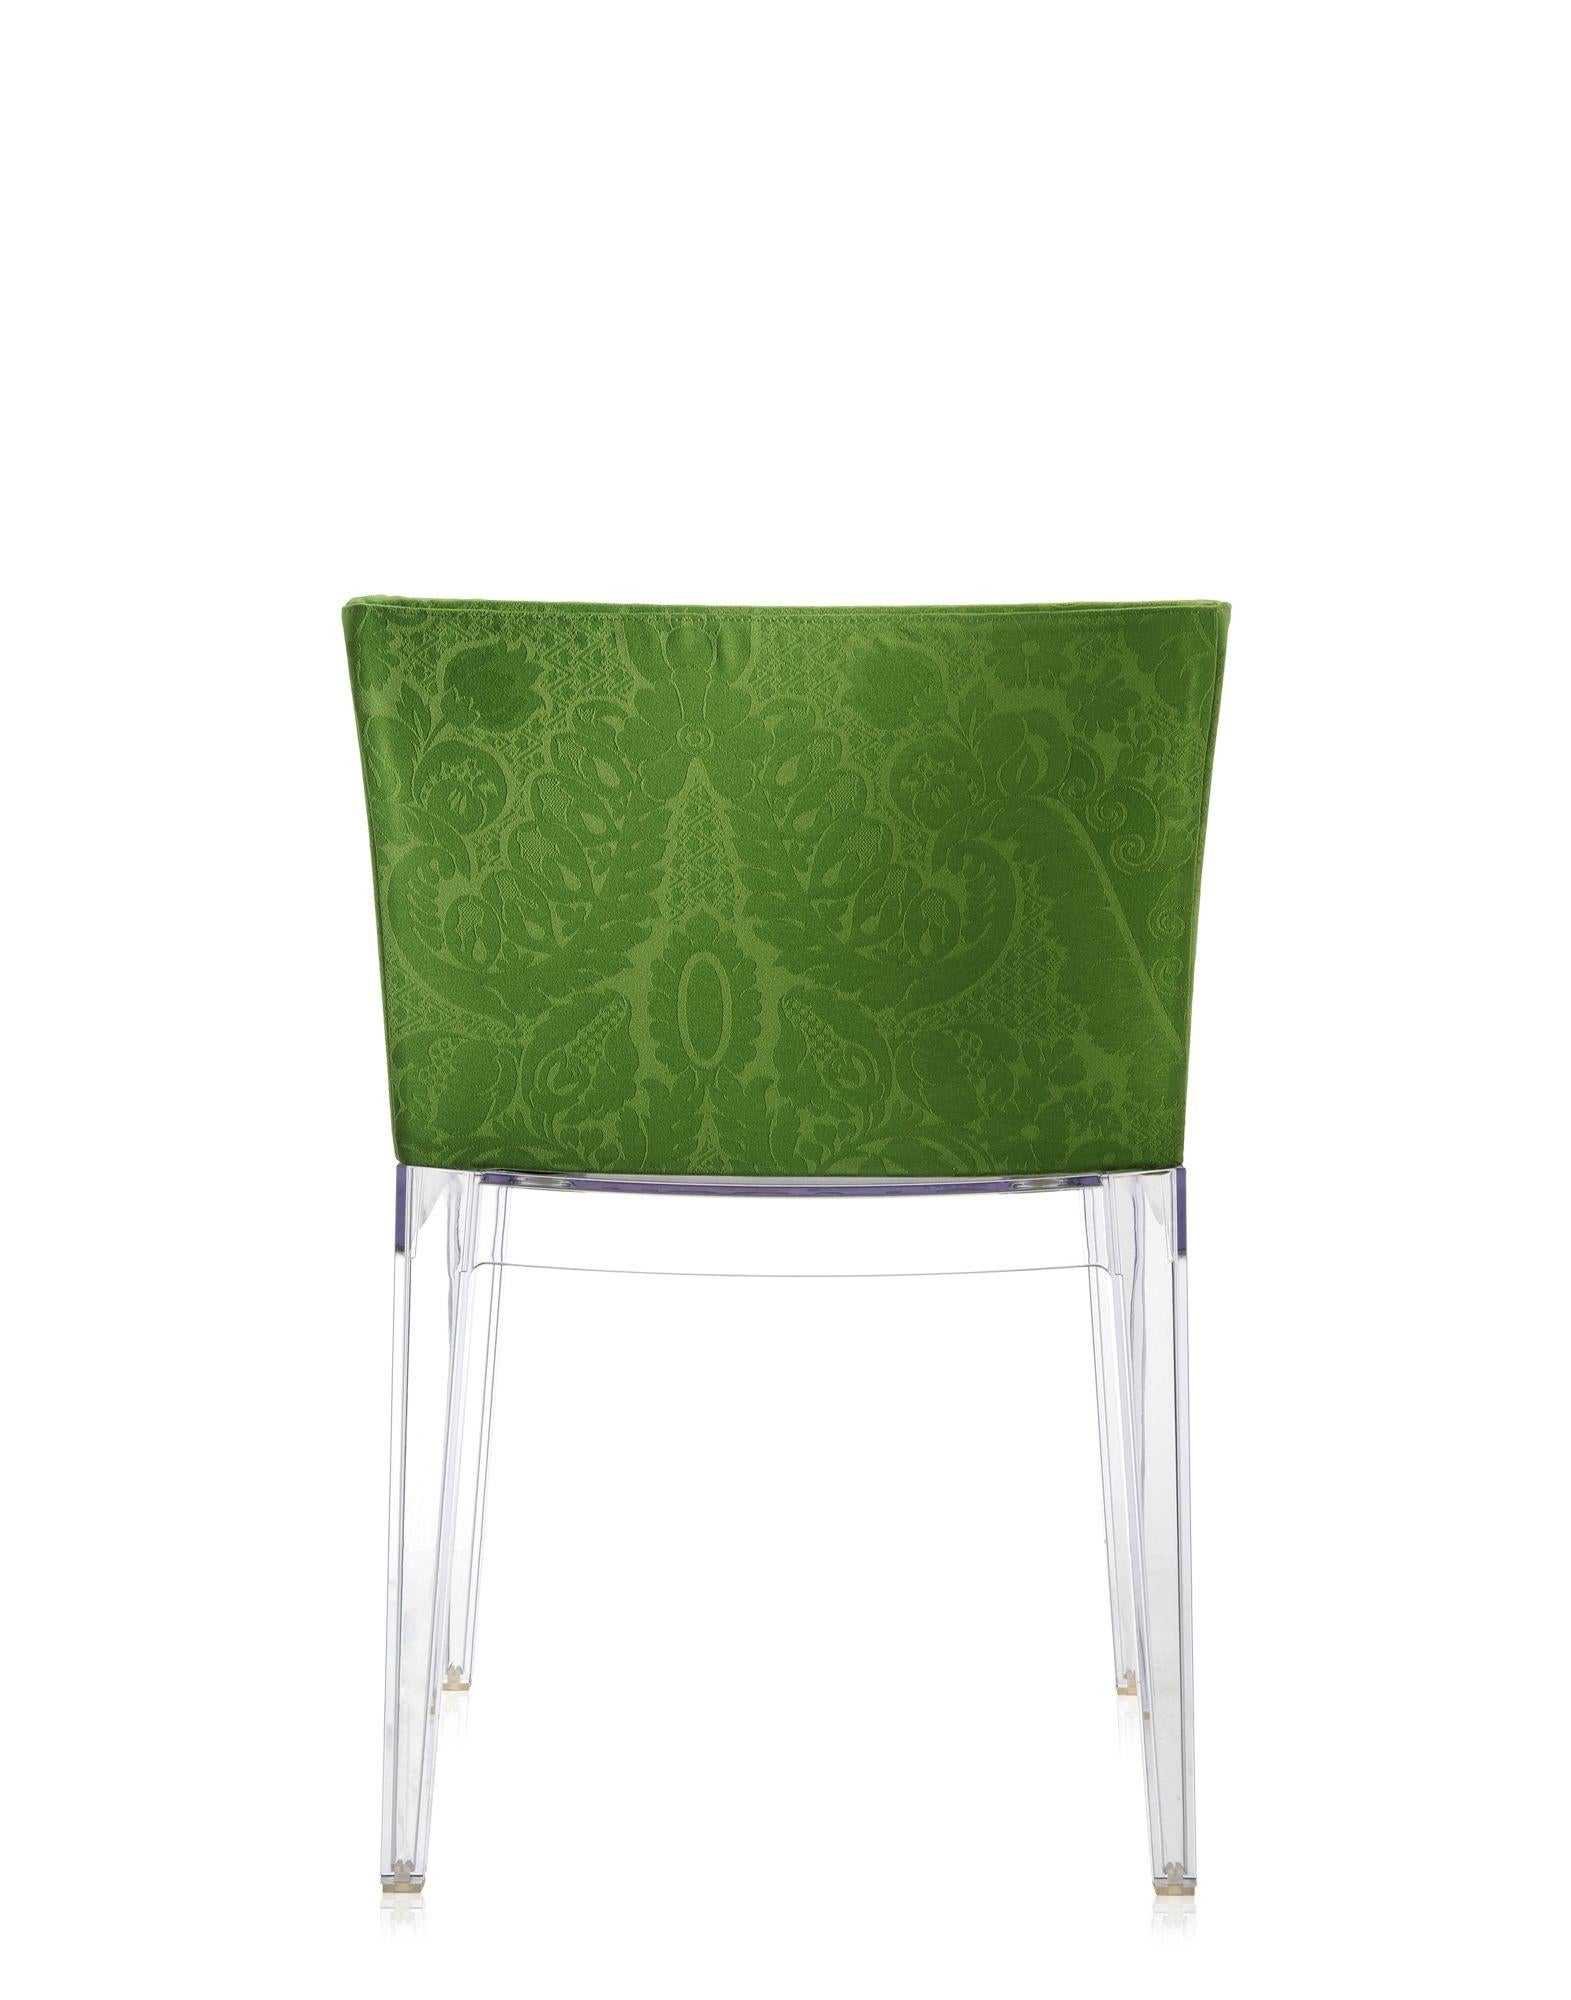 Kartell Mademoiselle Chair by Philippe Starck in Green Damask In New Condition For Sale In Brooklyn, NY